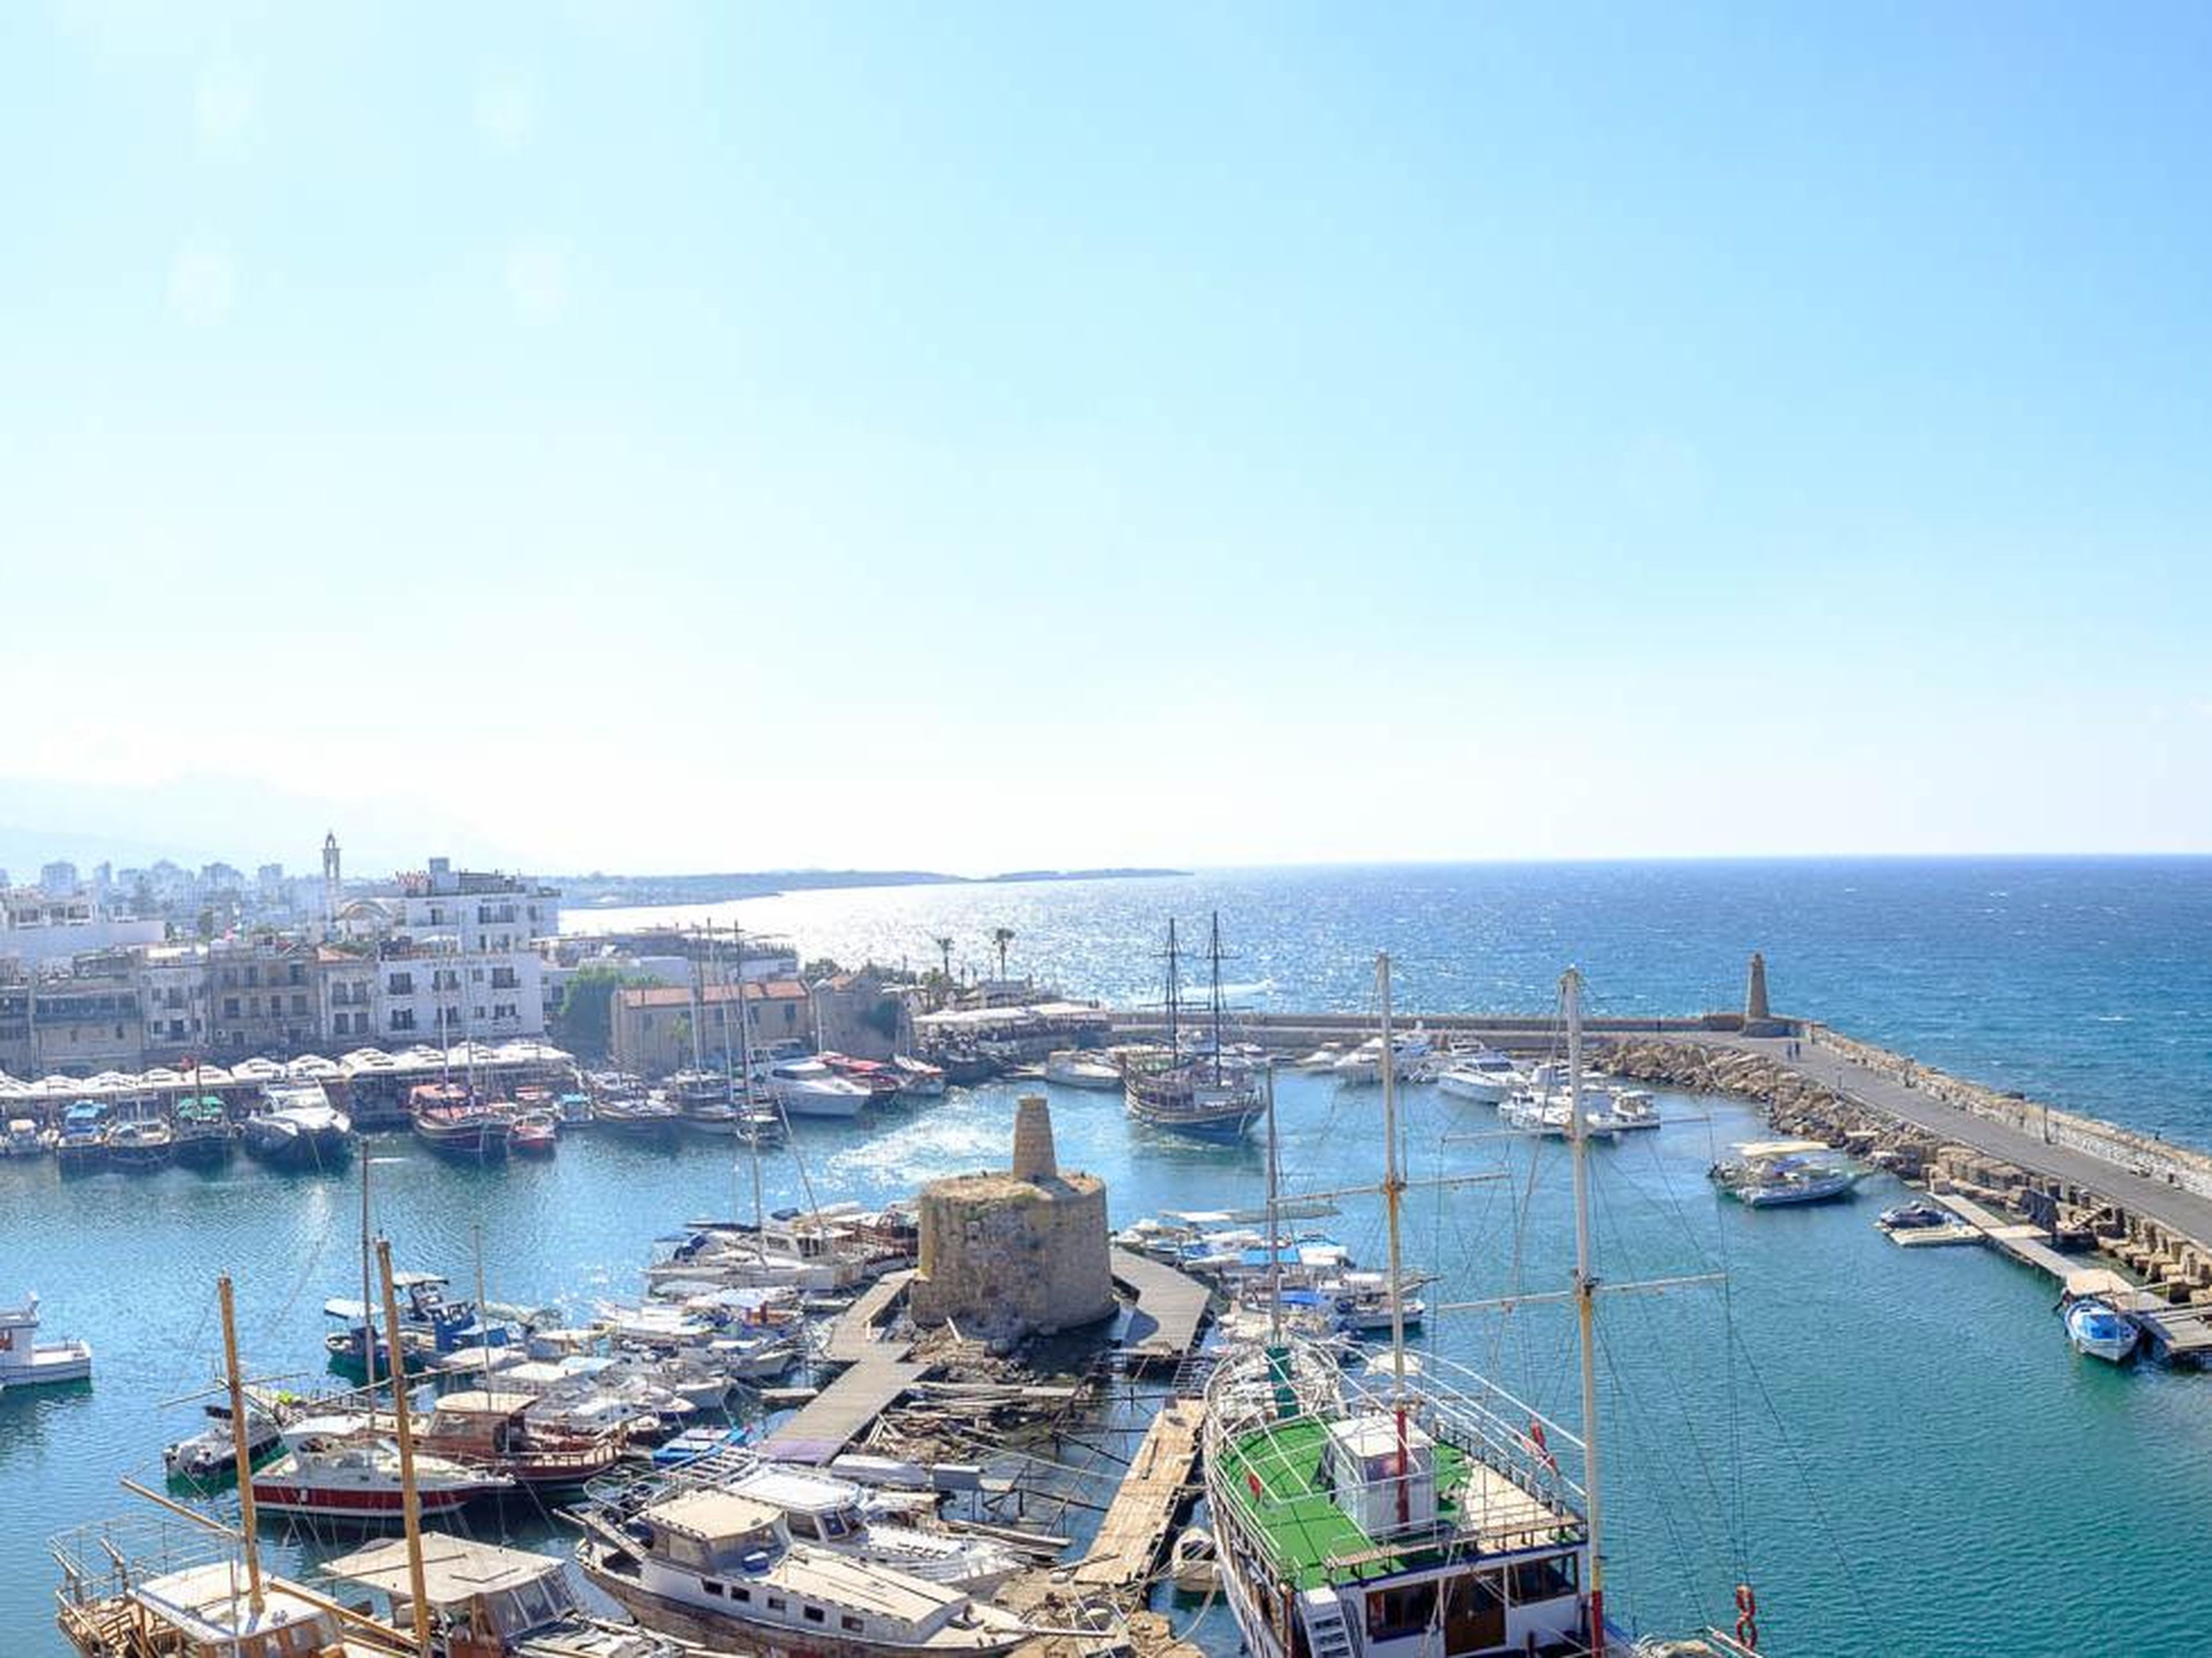 About 3,600 square miles in size, Cyprus has tons of different geographical features from natural ports to mountains, valleys, and rock formations that make driving the island a pleasure. Kyrenia Harbor, on the Northern Cyprus